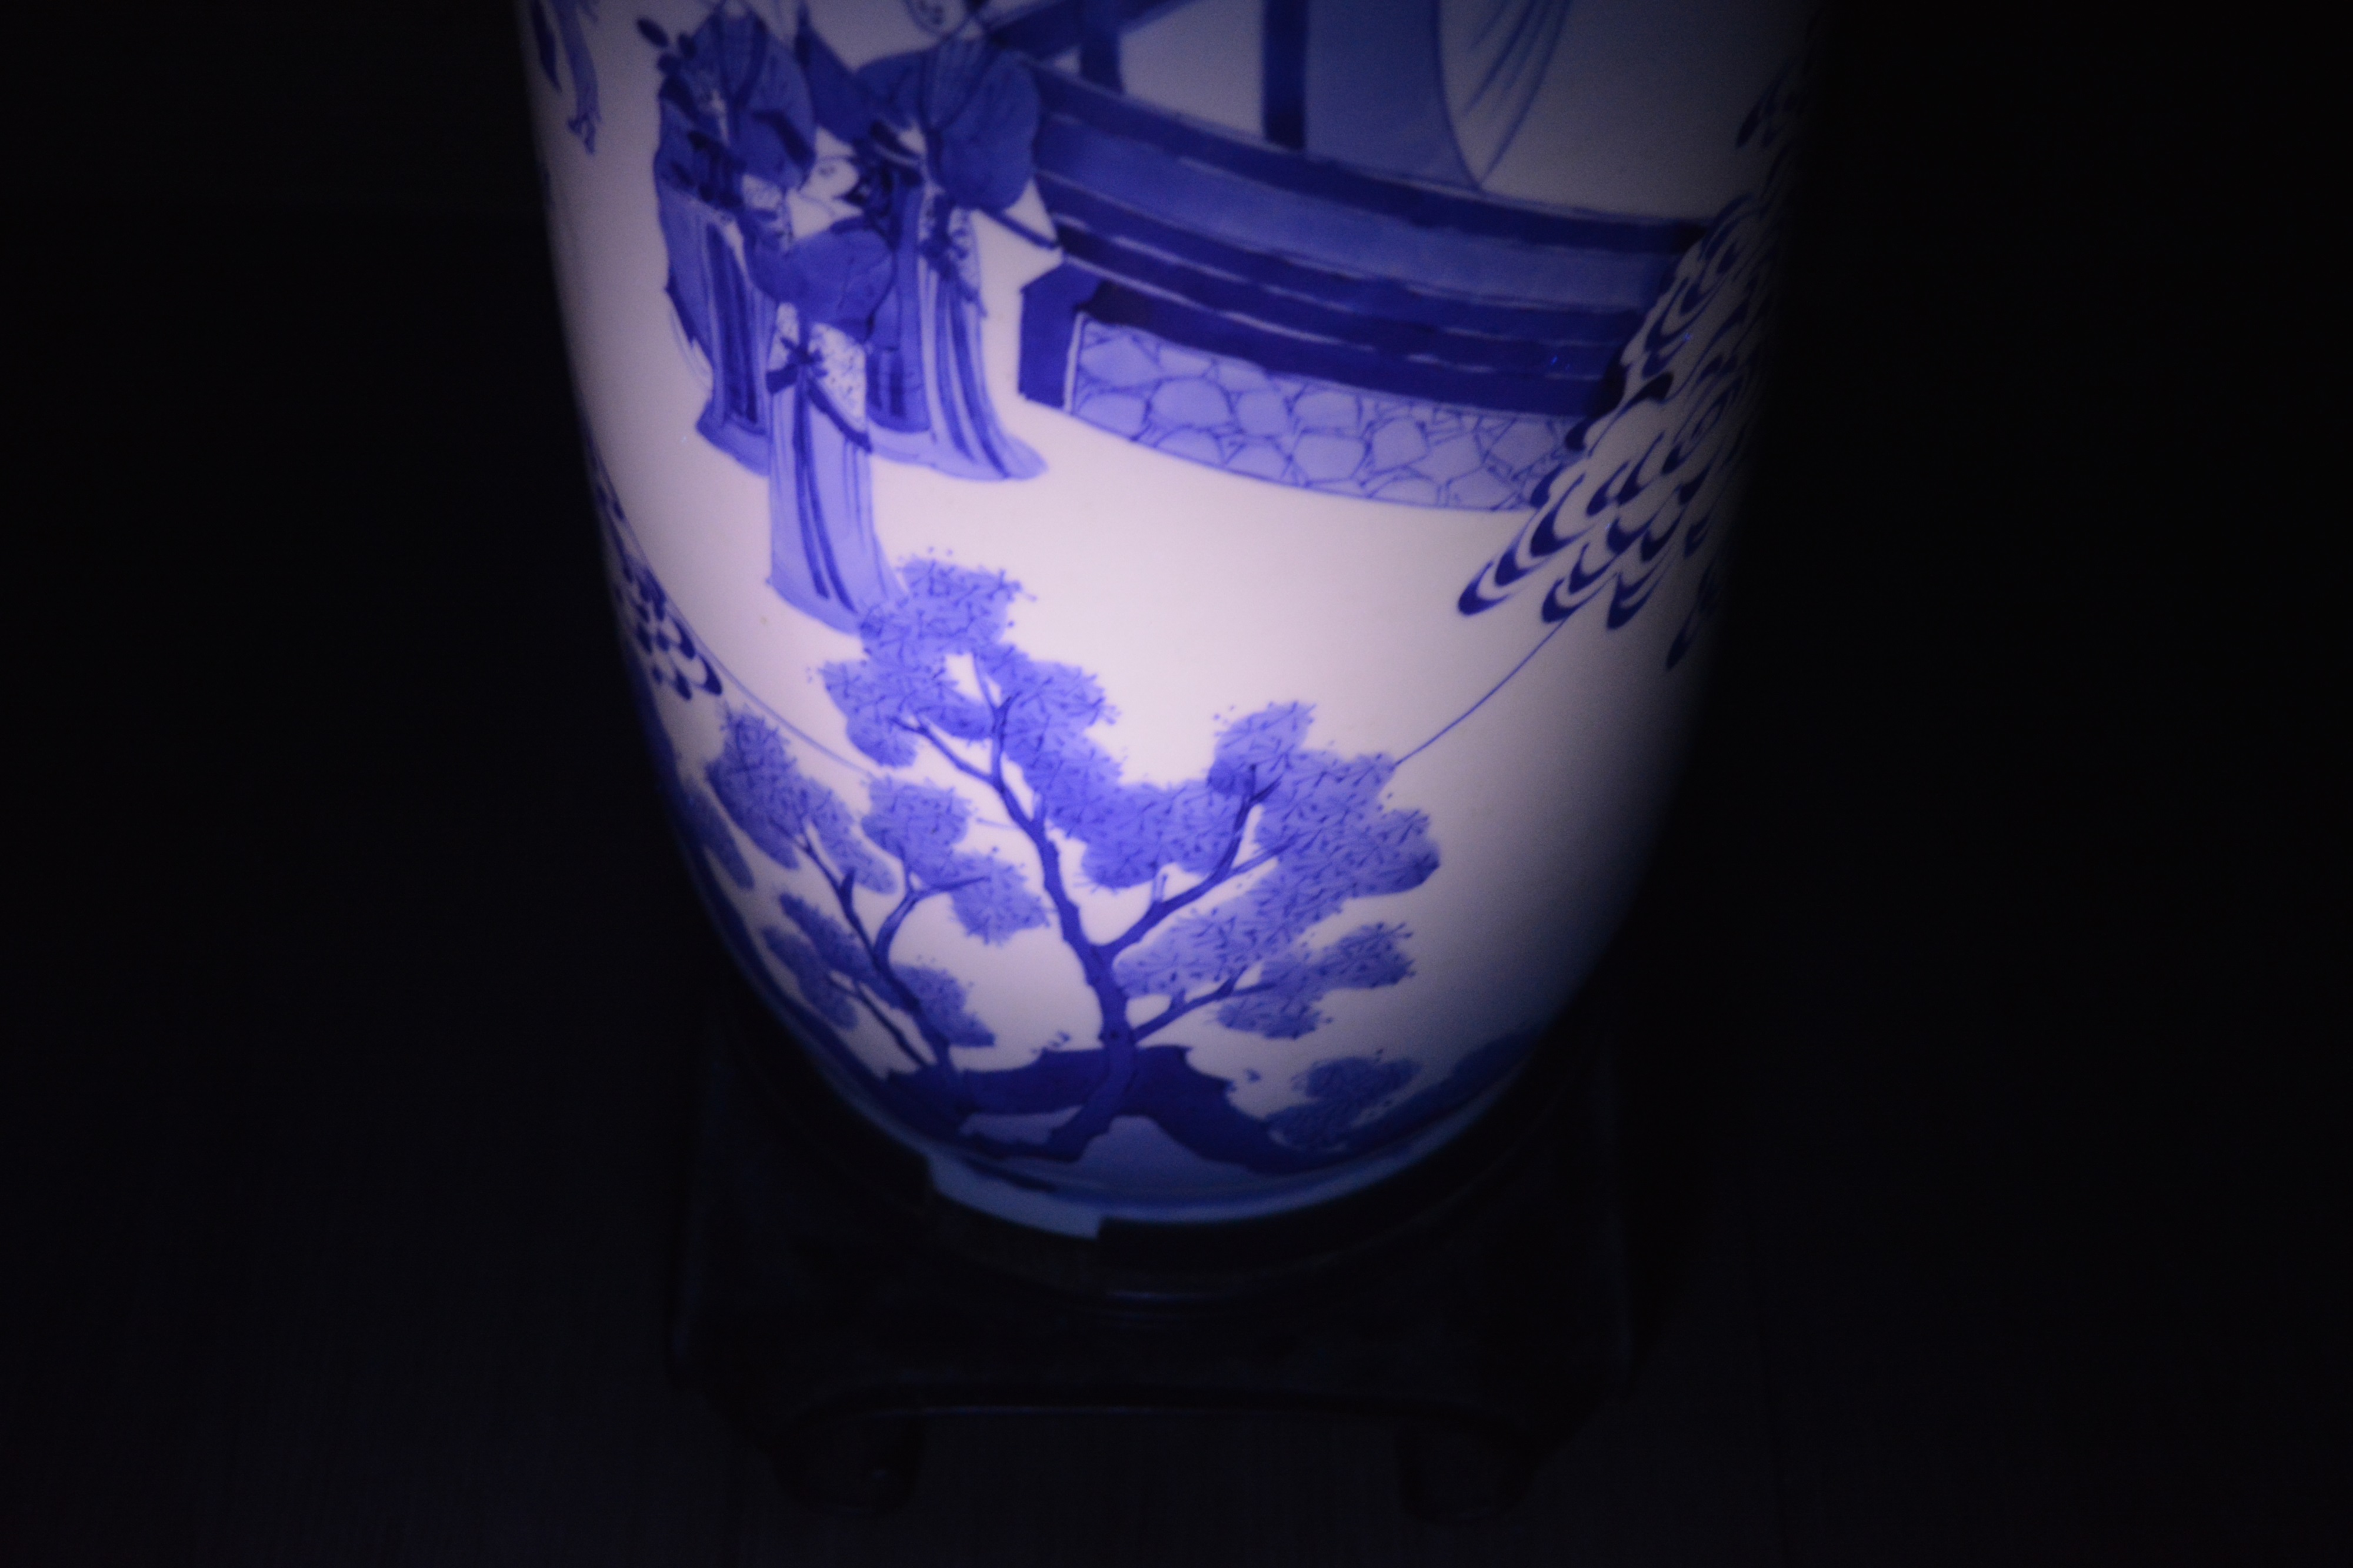 Blue and white porcelain rouleau vase Chinese, Kangxi painted with scholars, clouds, and figures - Image 26 of 33